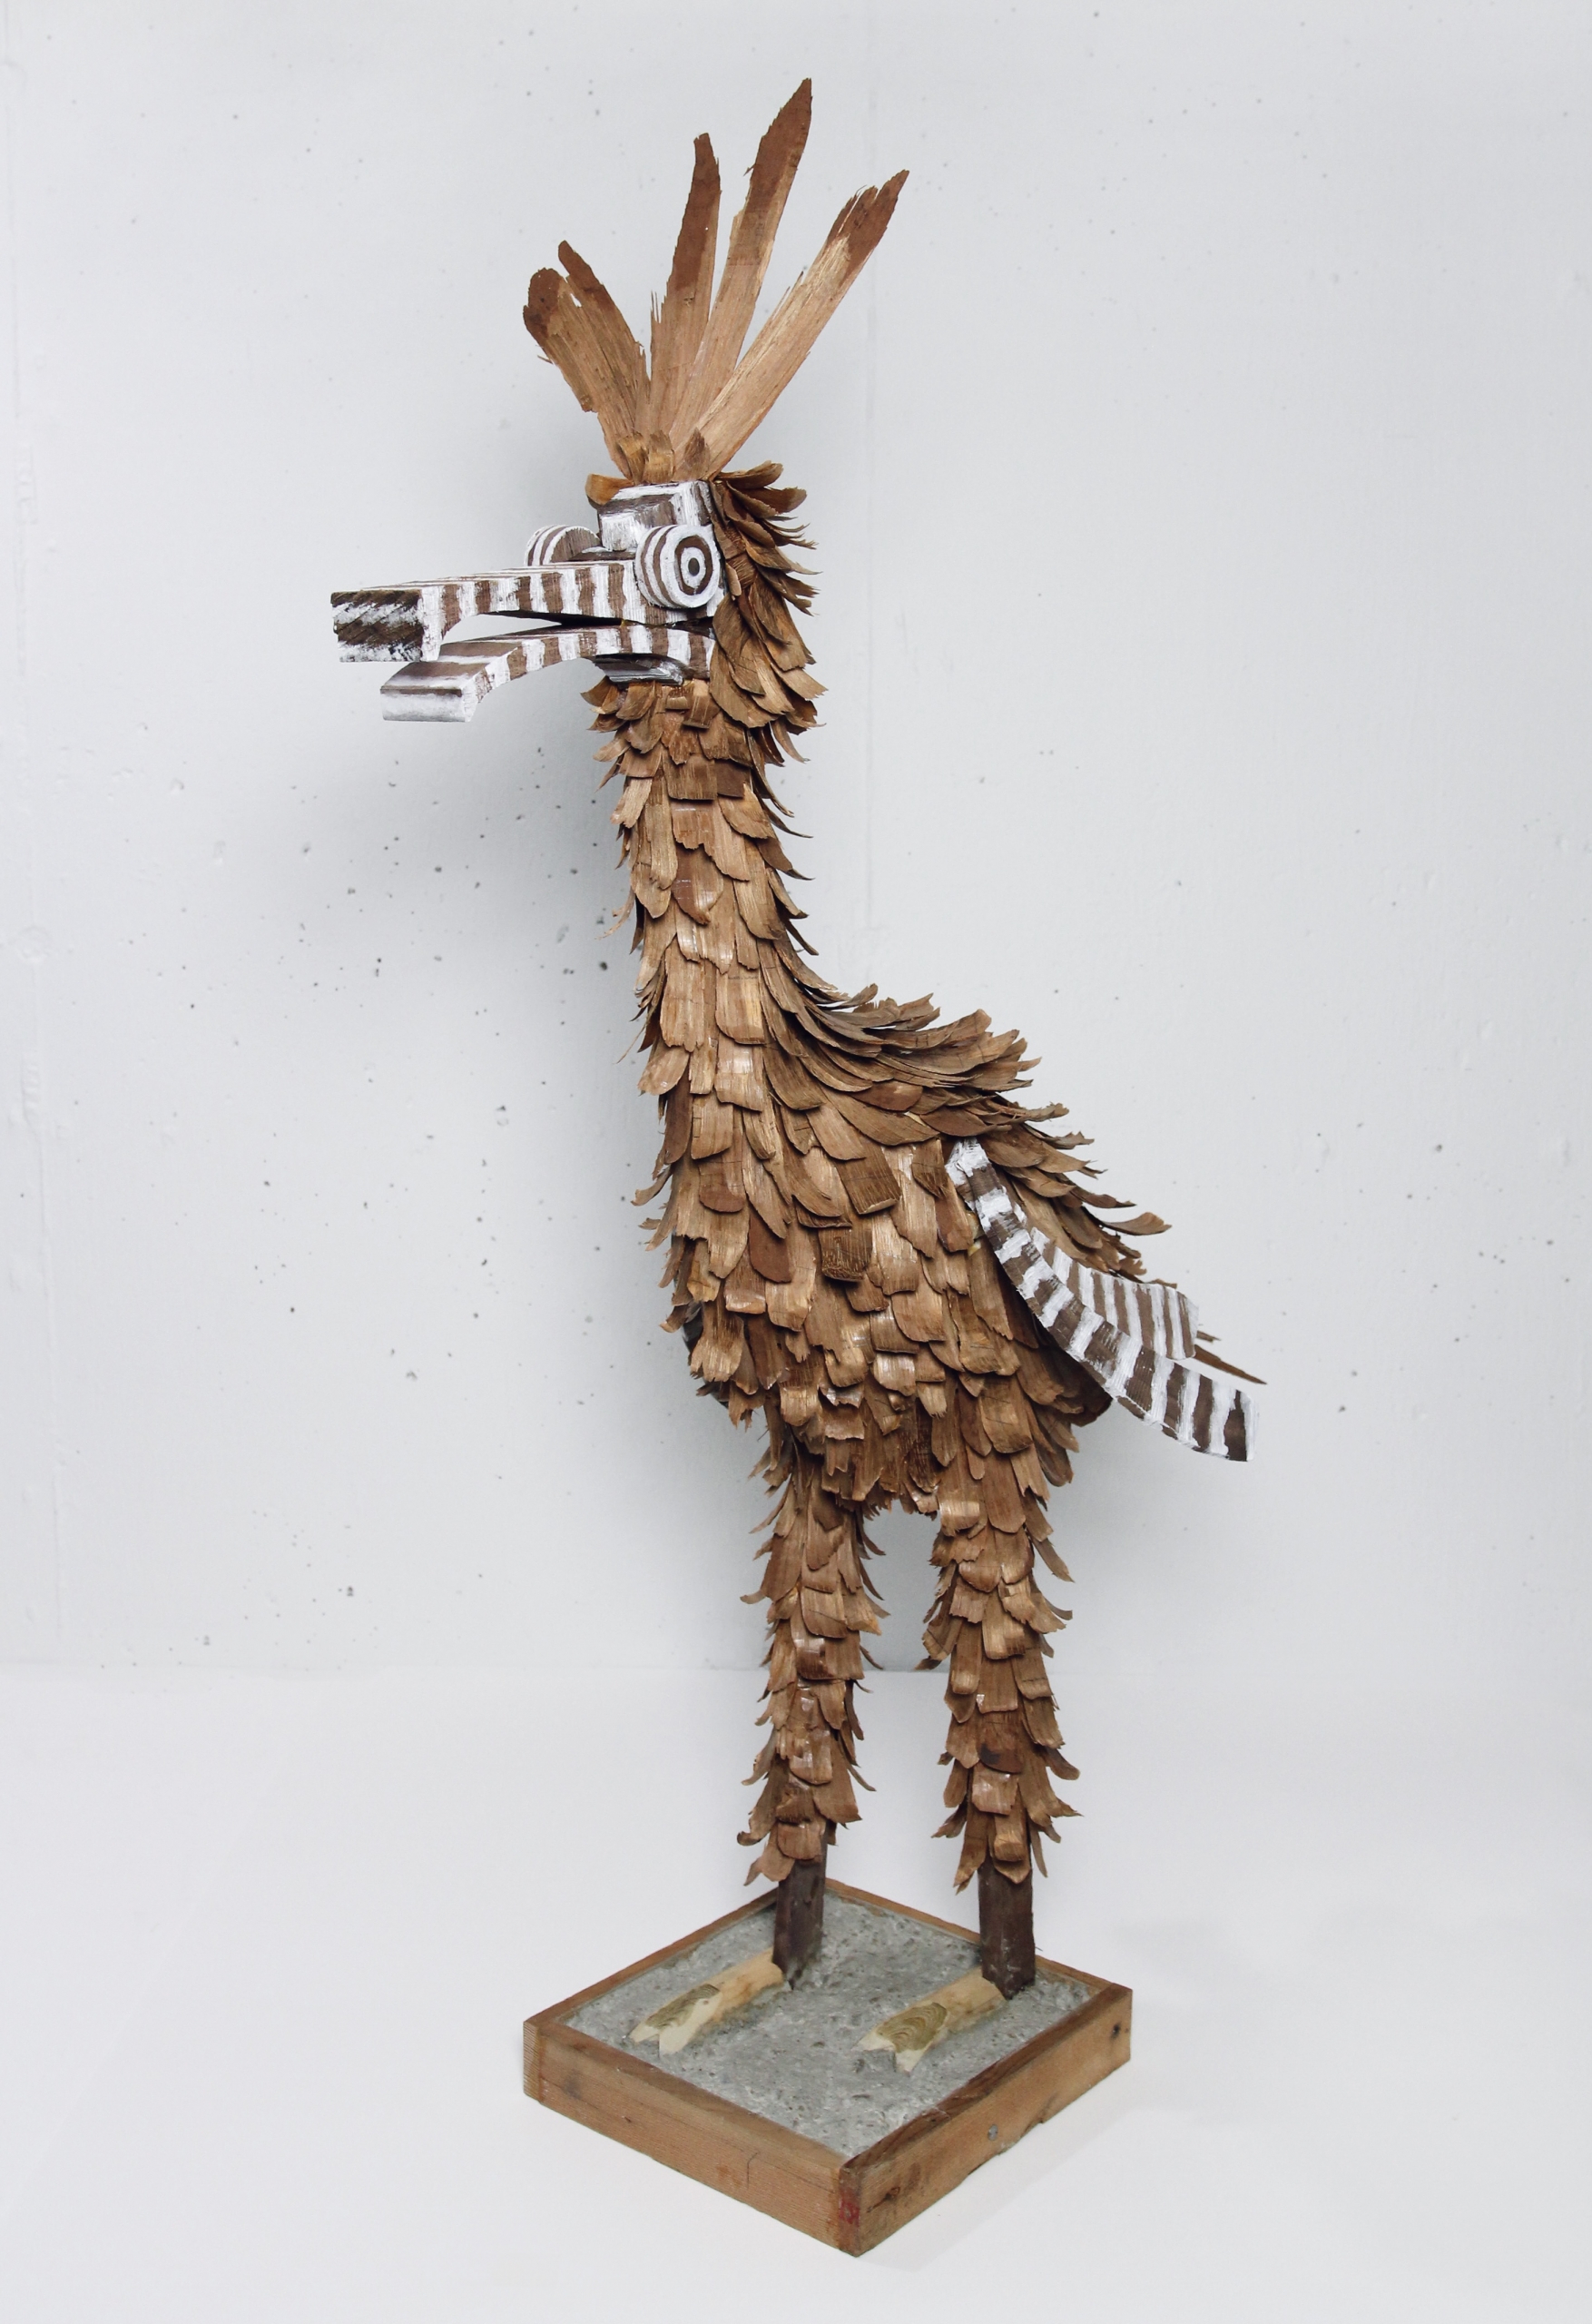 Bird no 3, 2021, various woods, nails, PVA glue, concrete, acrylic paint, 38 x 14 x 30 in